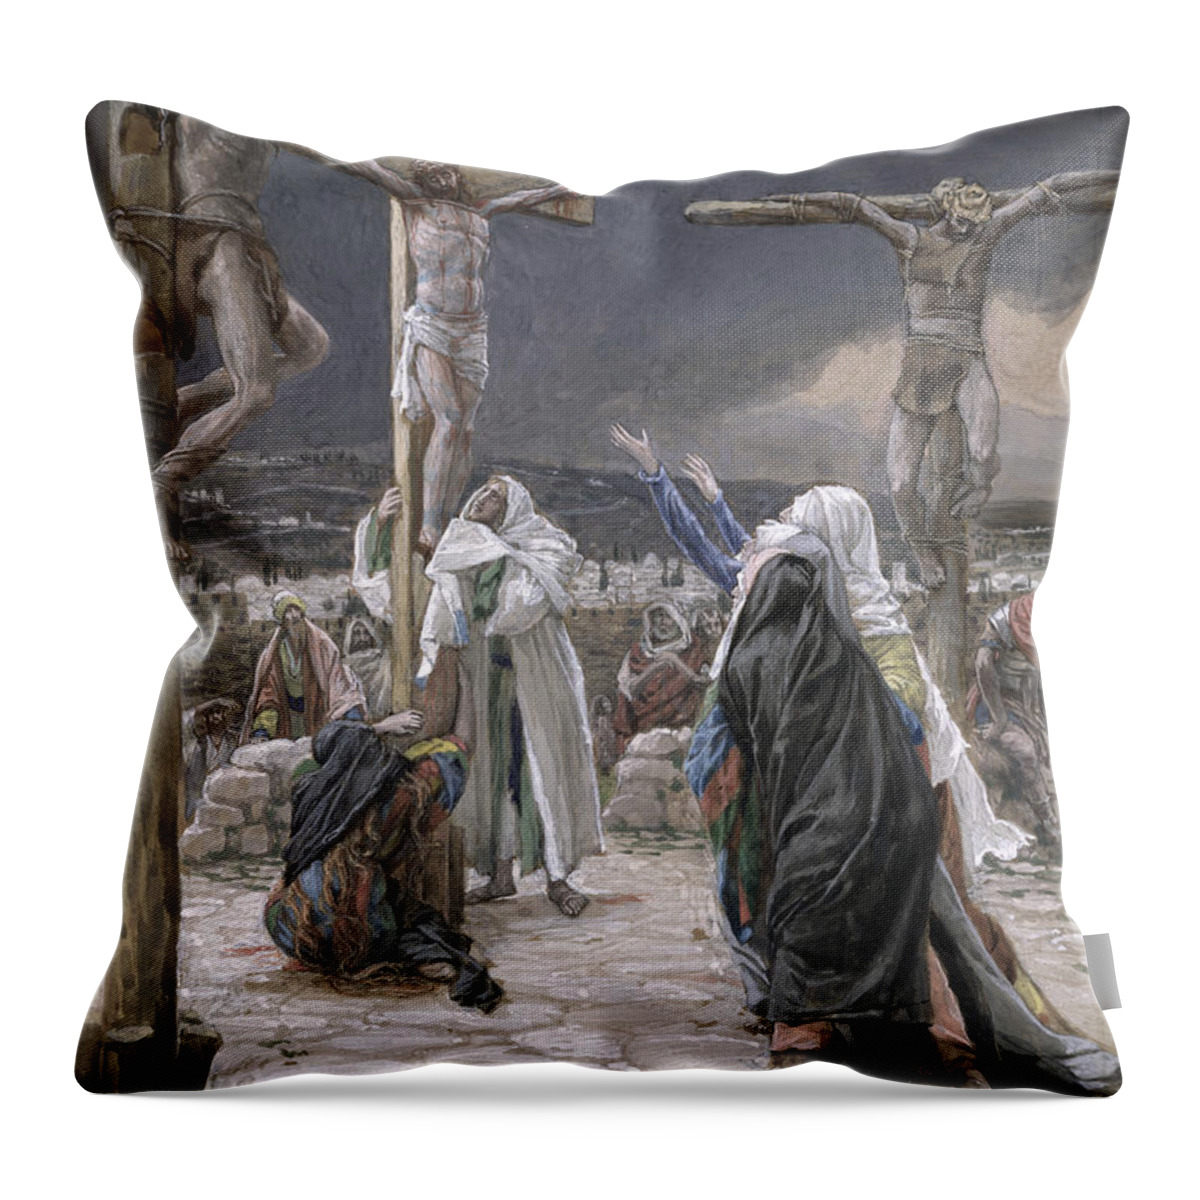 The Throw Pillow featuring the painting The Death of Jesus by Tissot